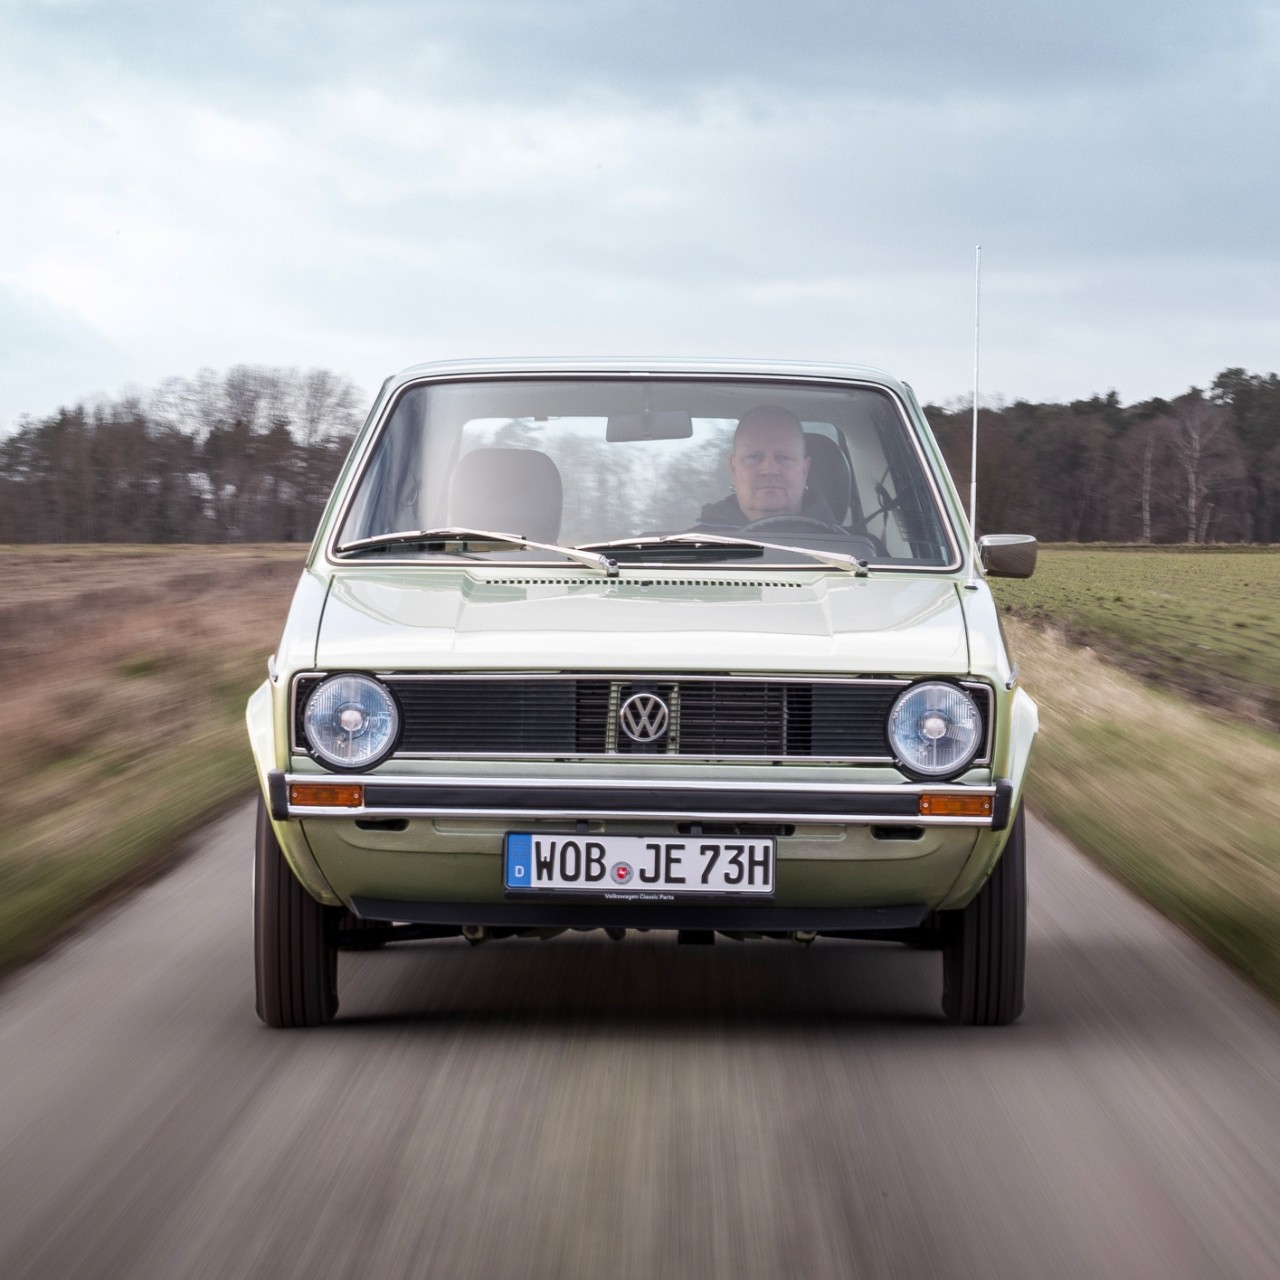 Discover the magazine article about the Golf 1 Opi at VW Classic Parts.